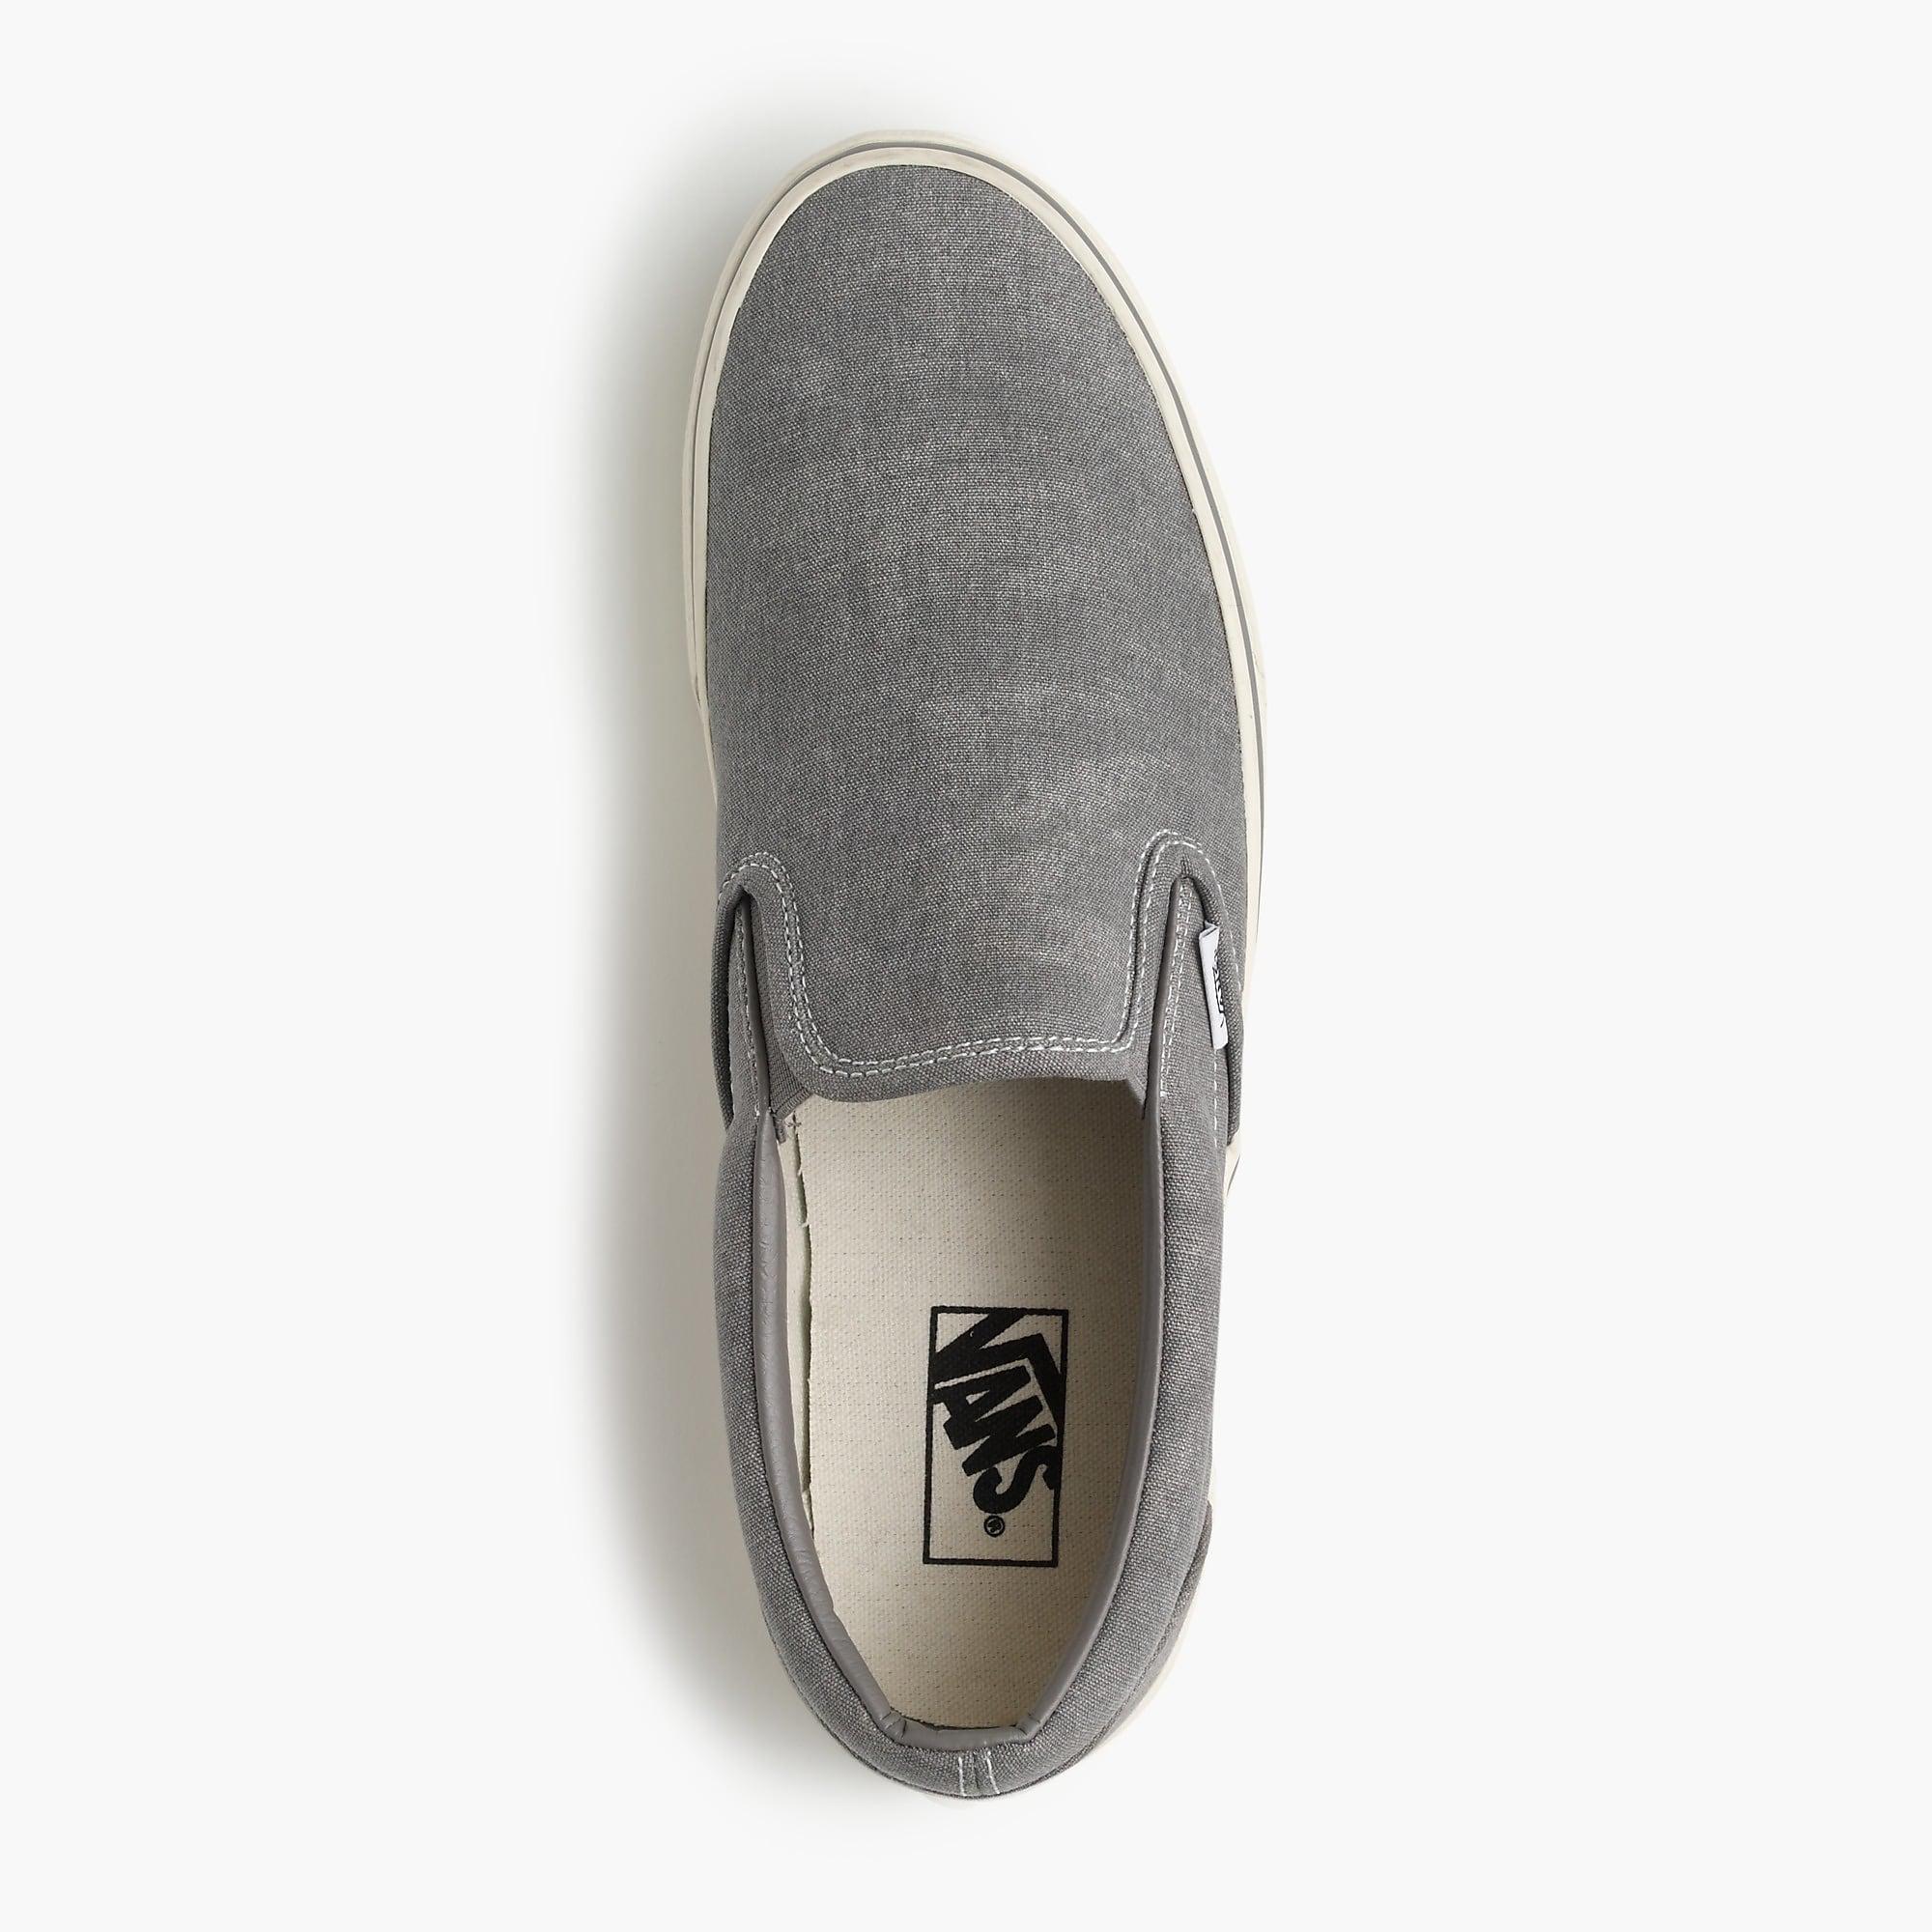 Vans Washed Canvas Classic Slip-on Sneakers in Metallic for Men - Lyst